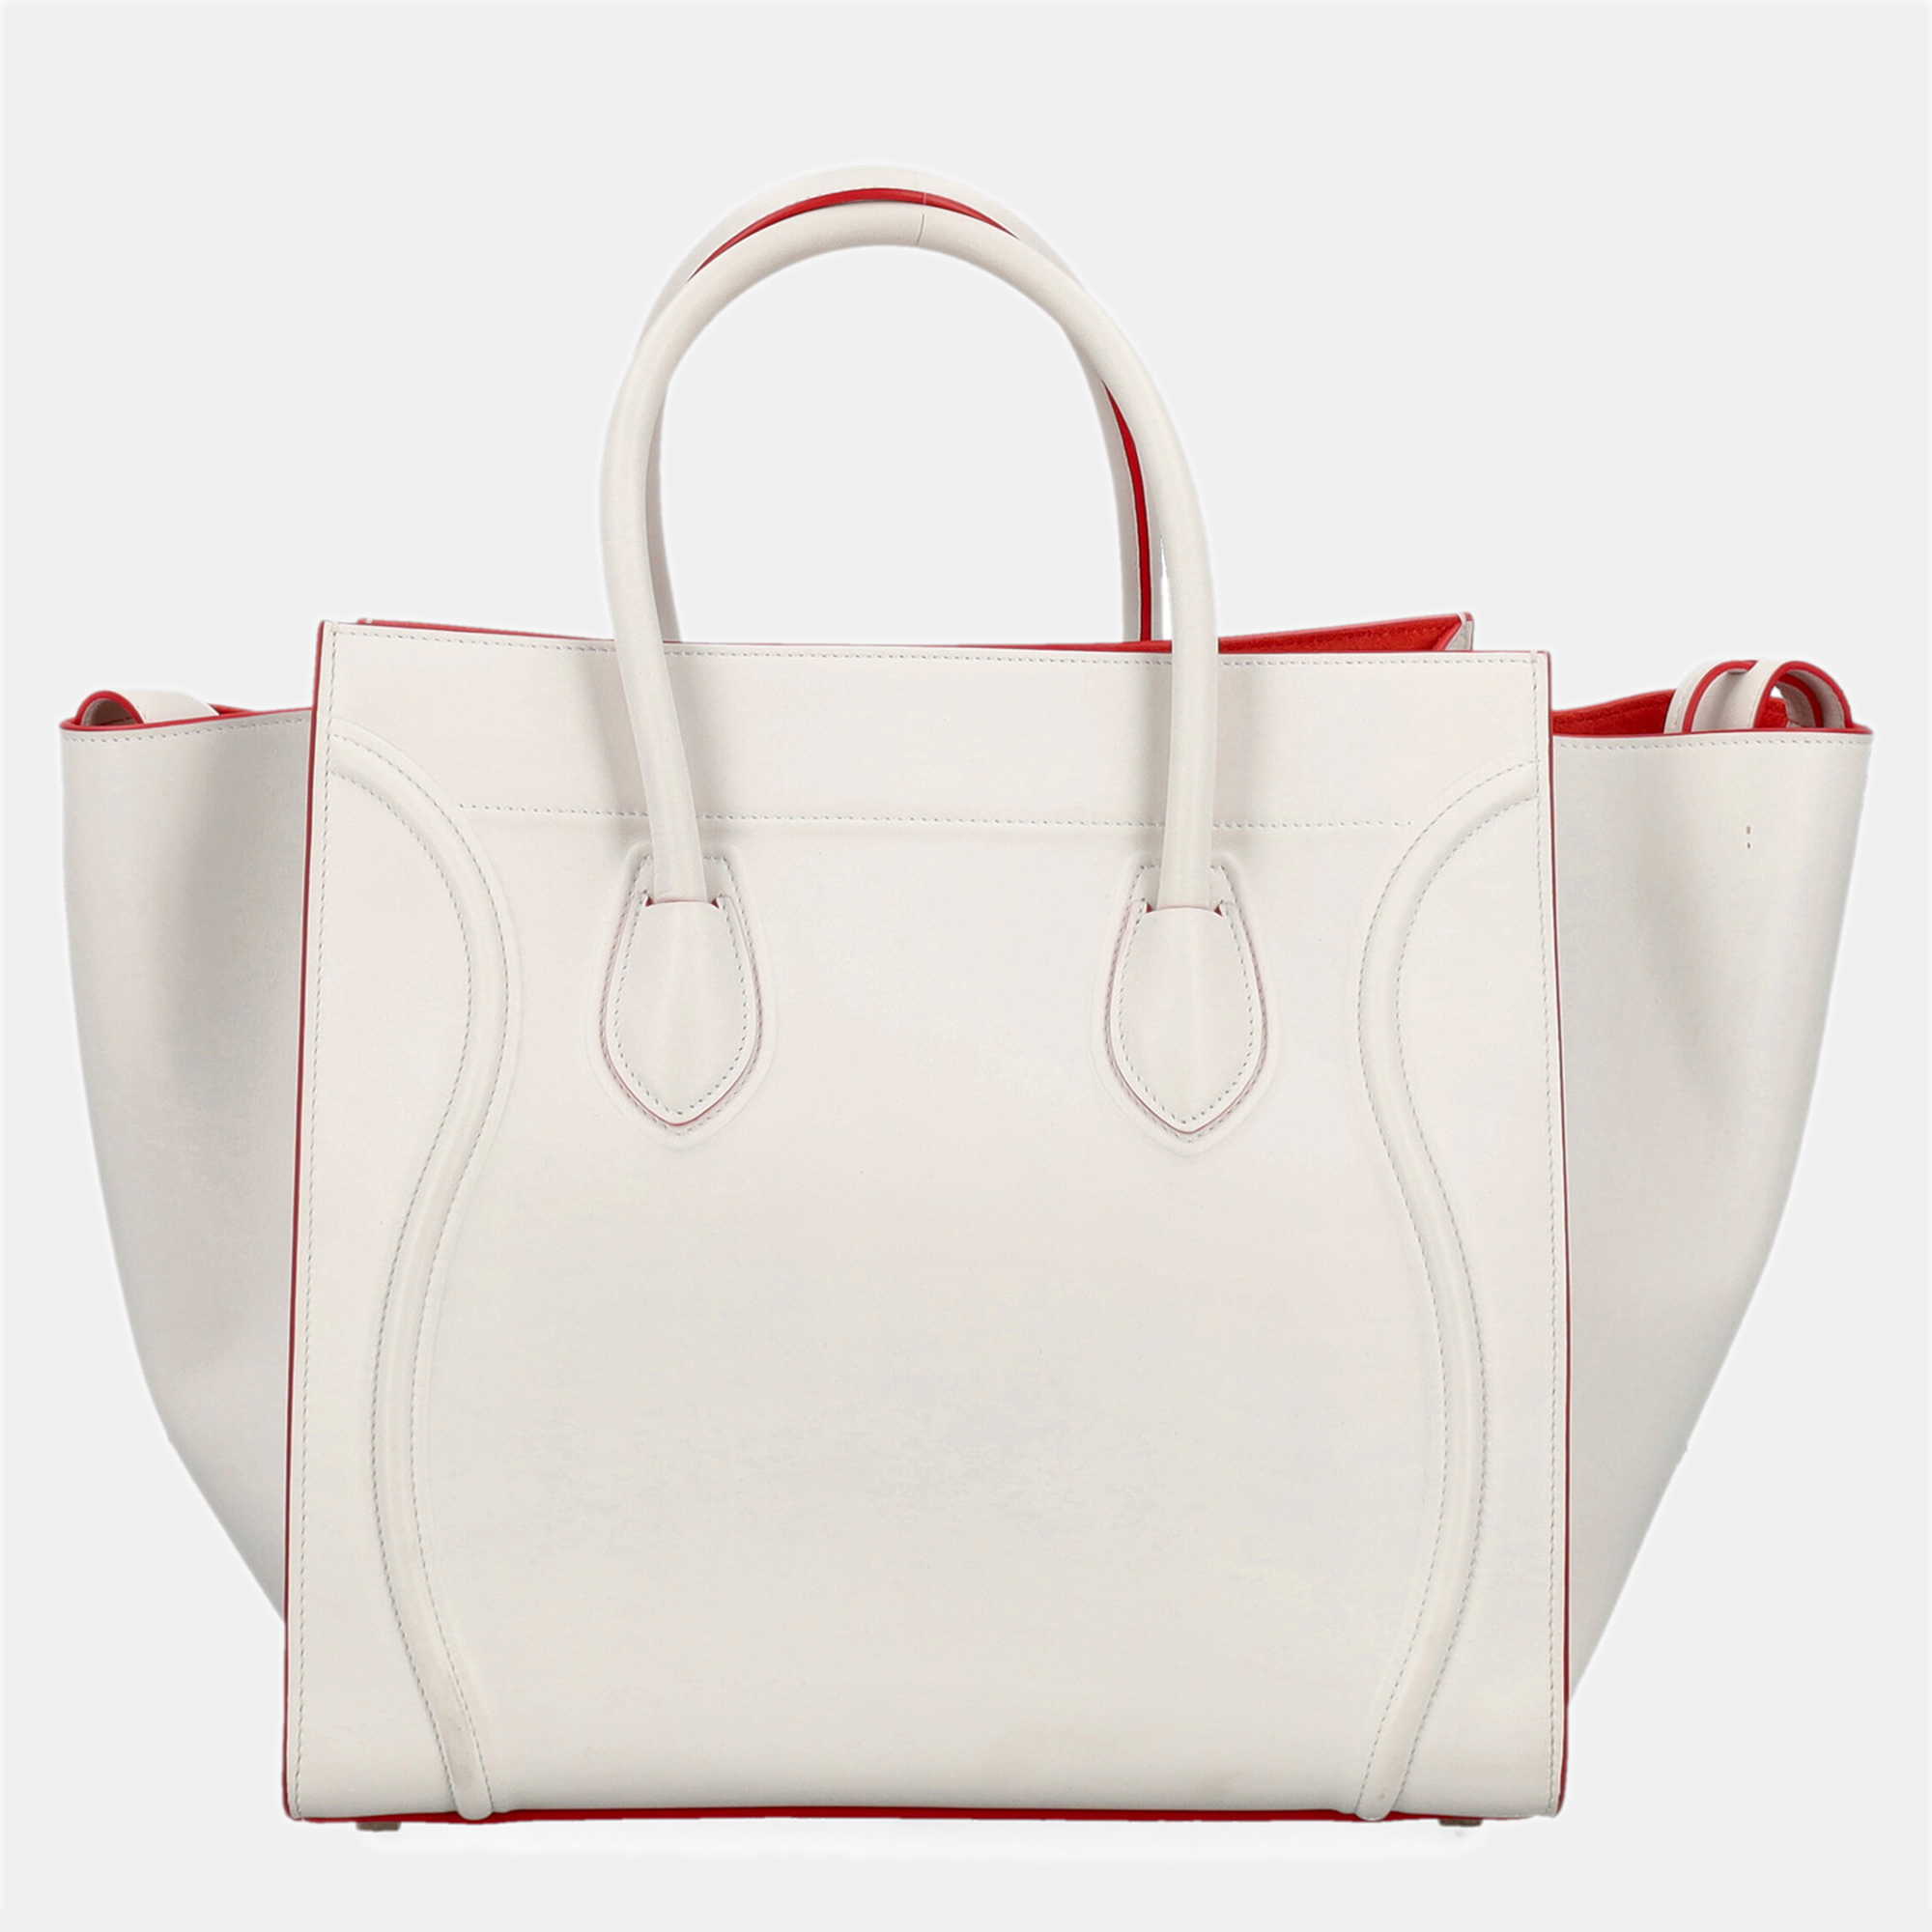 Celine  Women's Leather Tote Bag - White - One Size